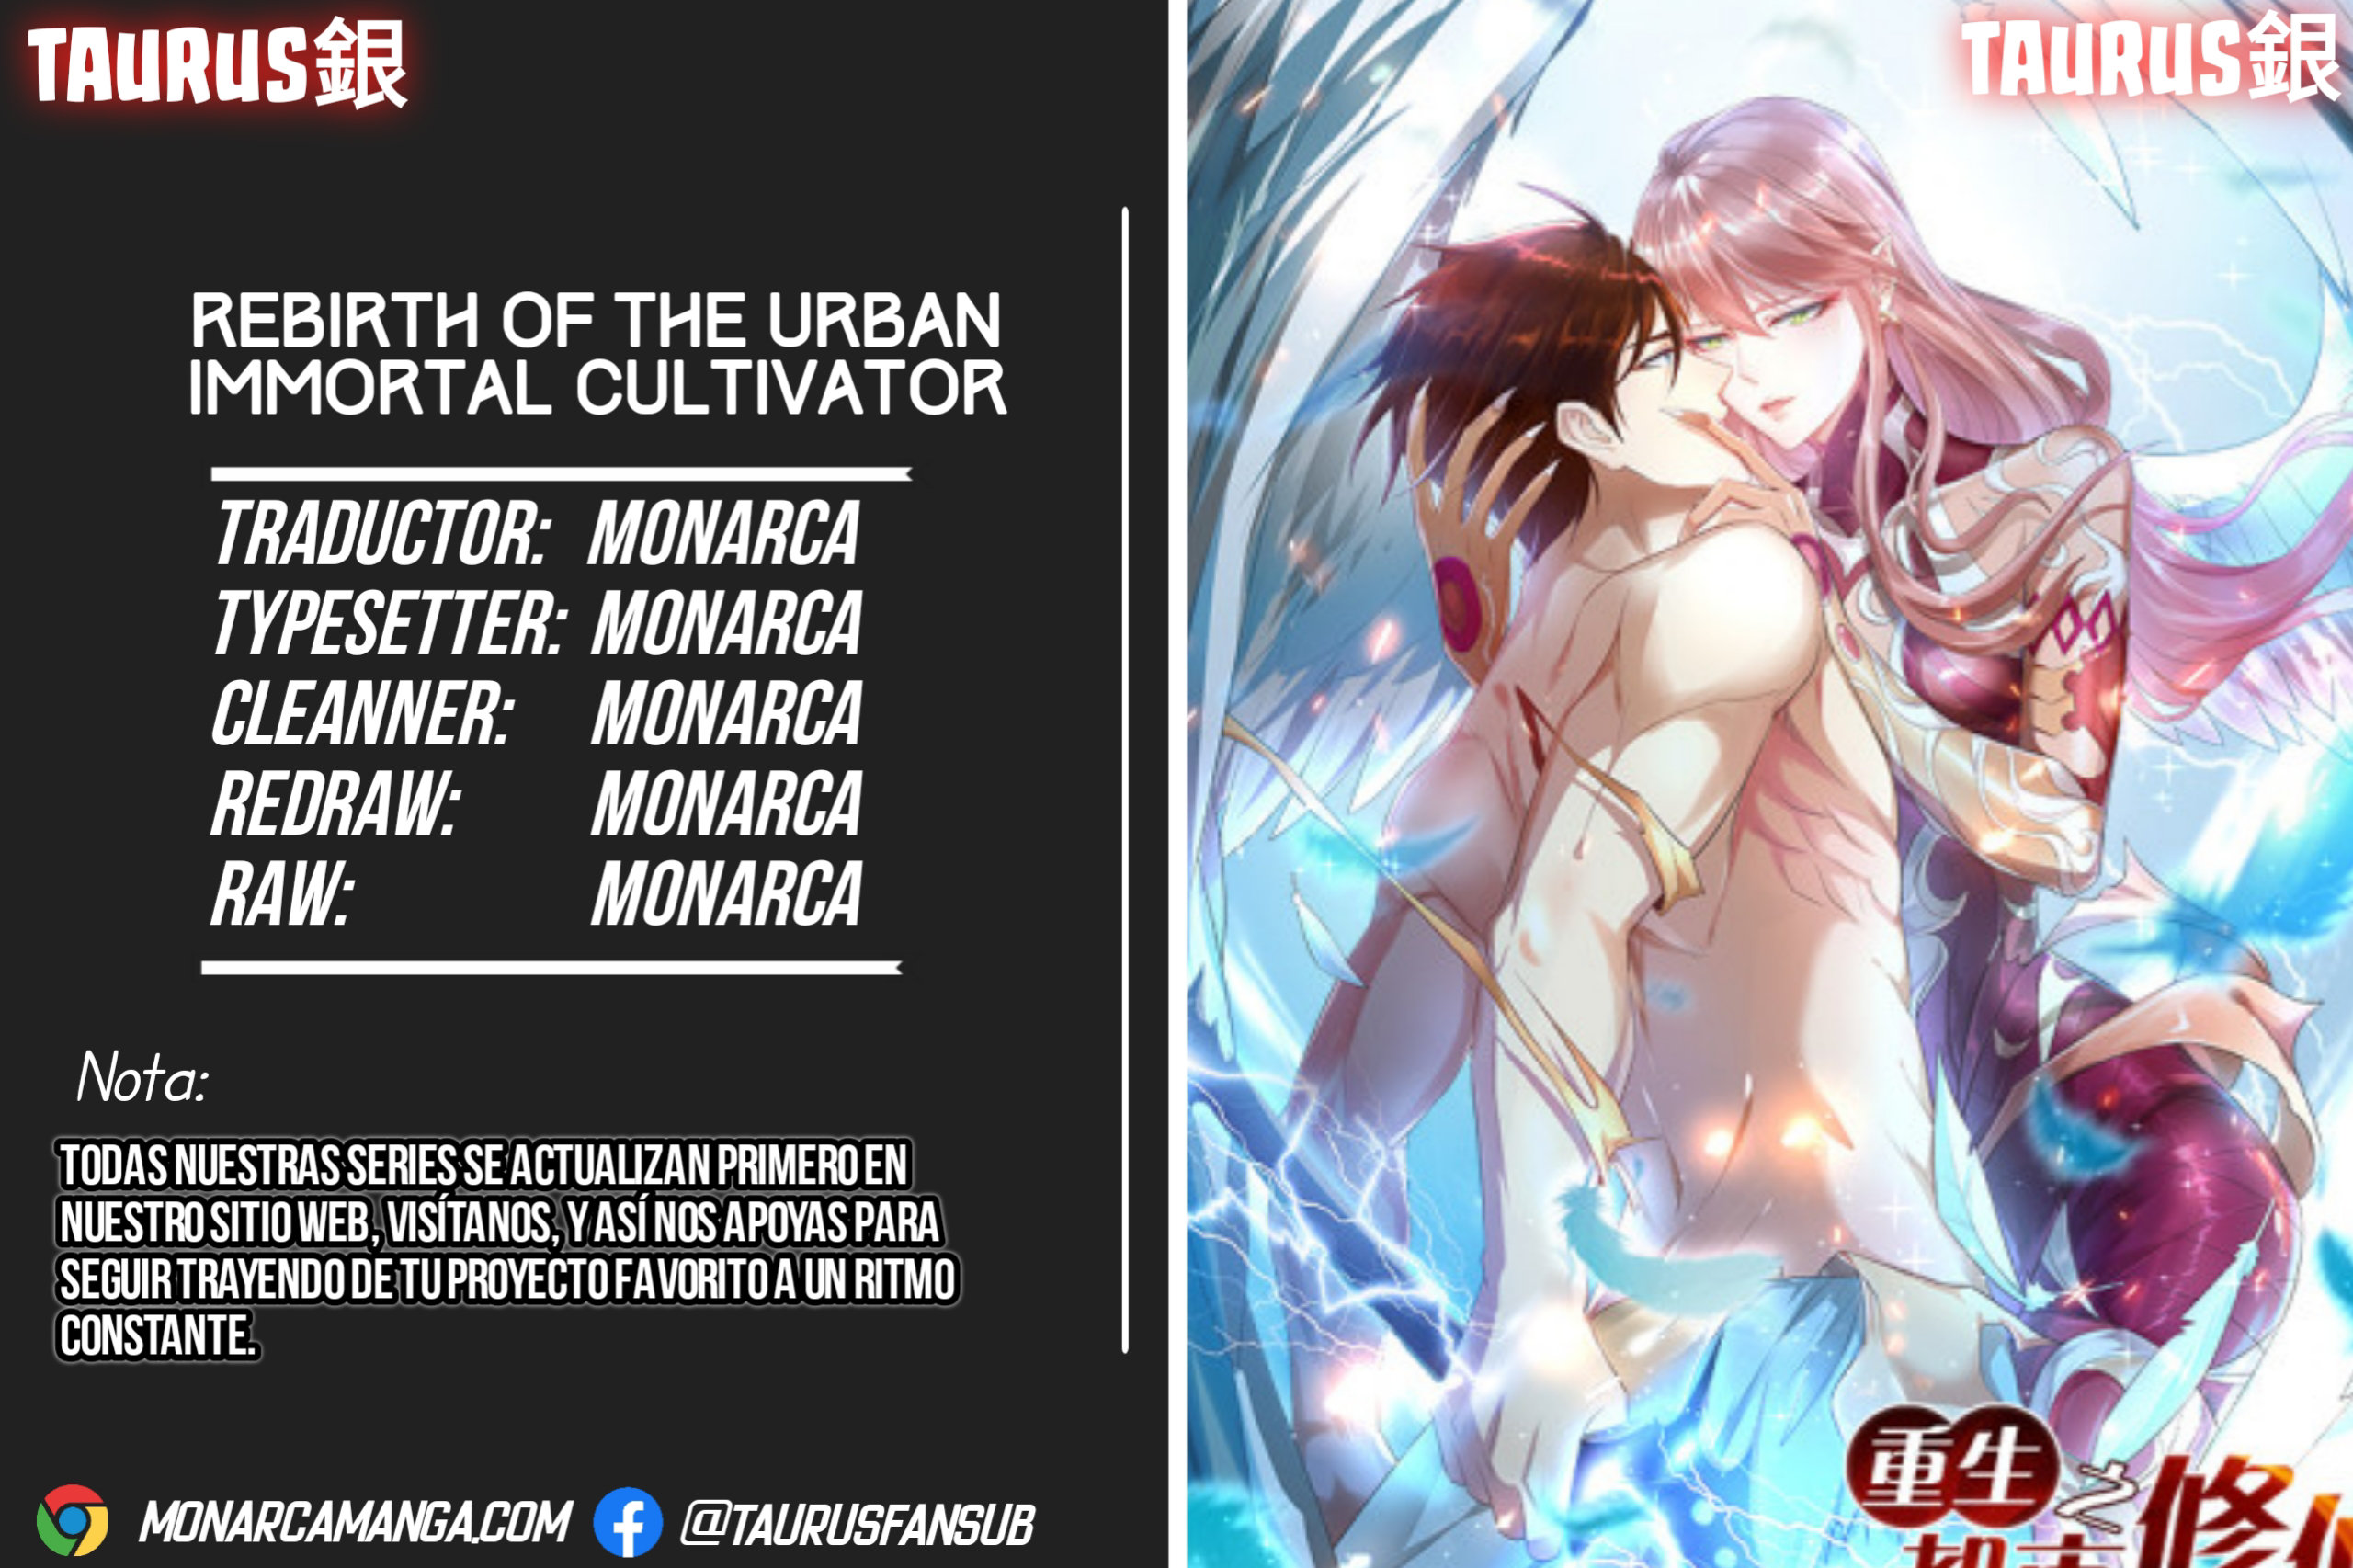 Manga Rebirth Of The Urban Immortal Cultivator Chapter 701 image number 9